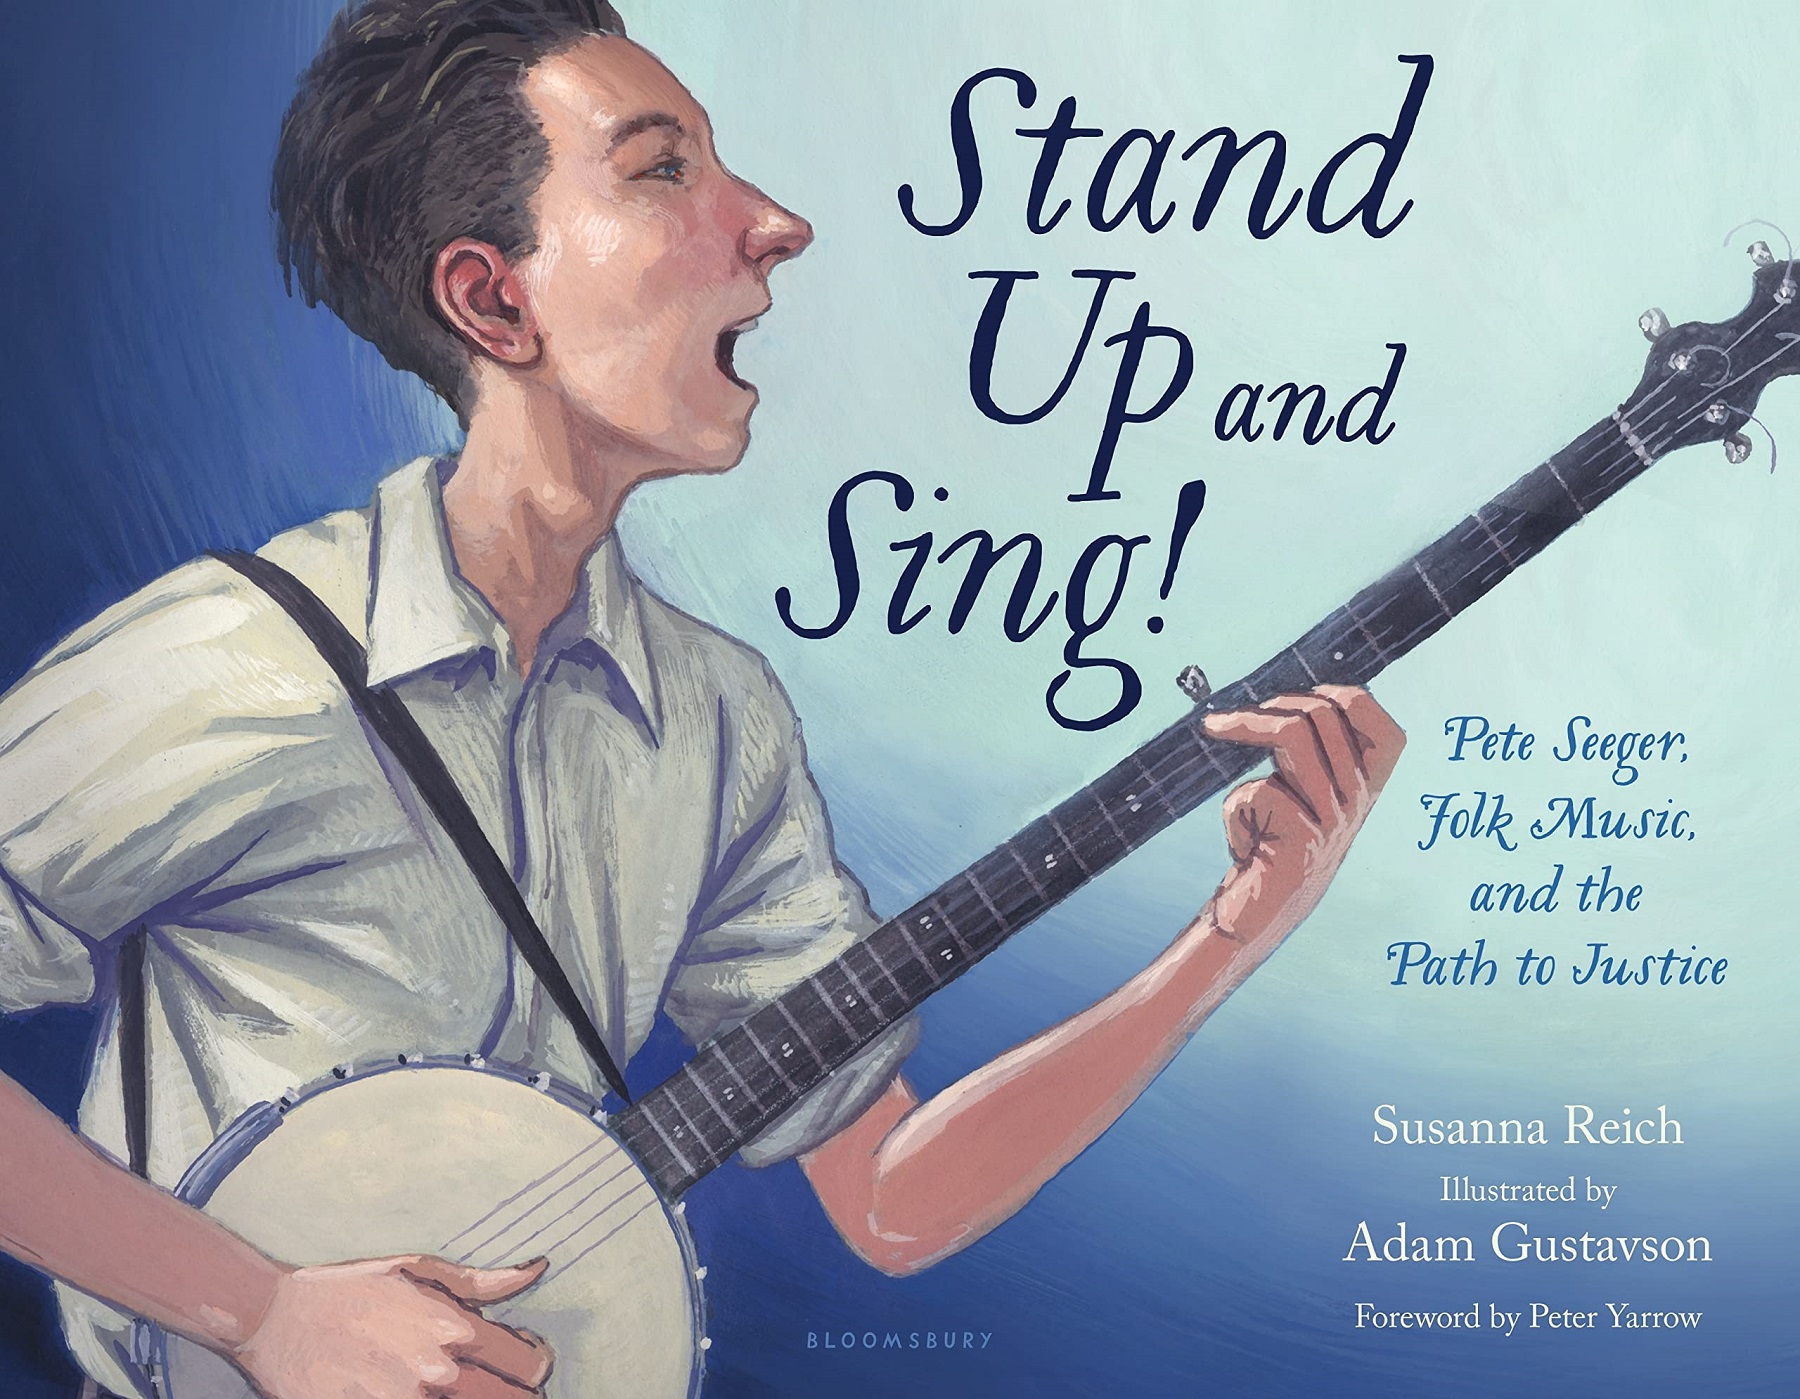 Book Cover of Stand Up and Sing, written by Susanna Reich